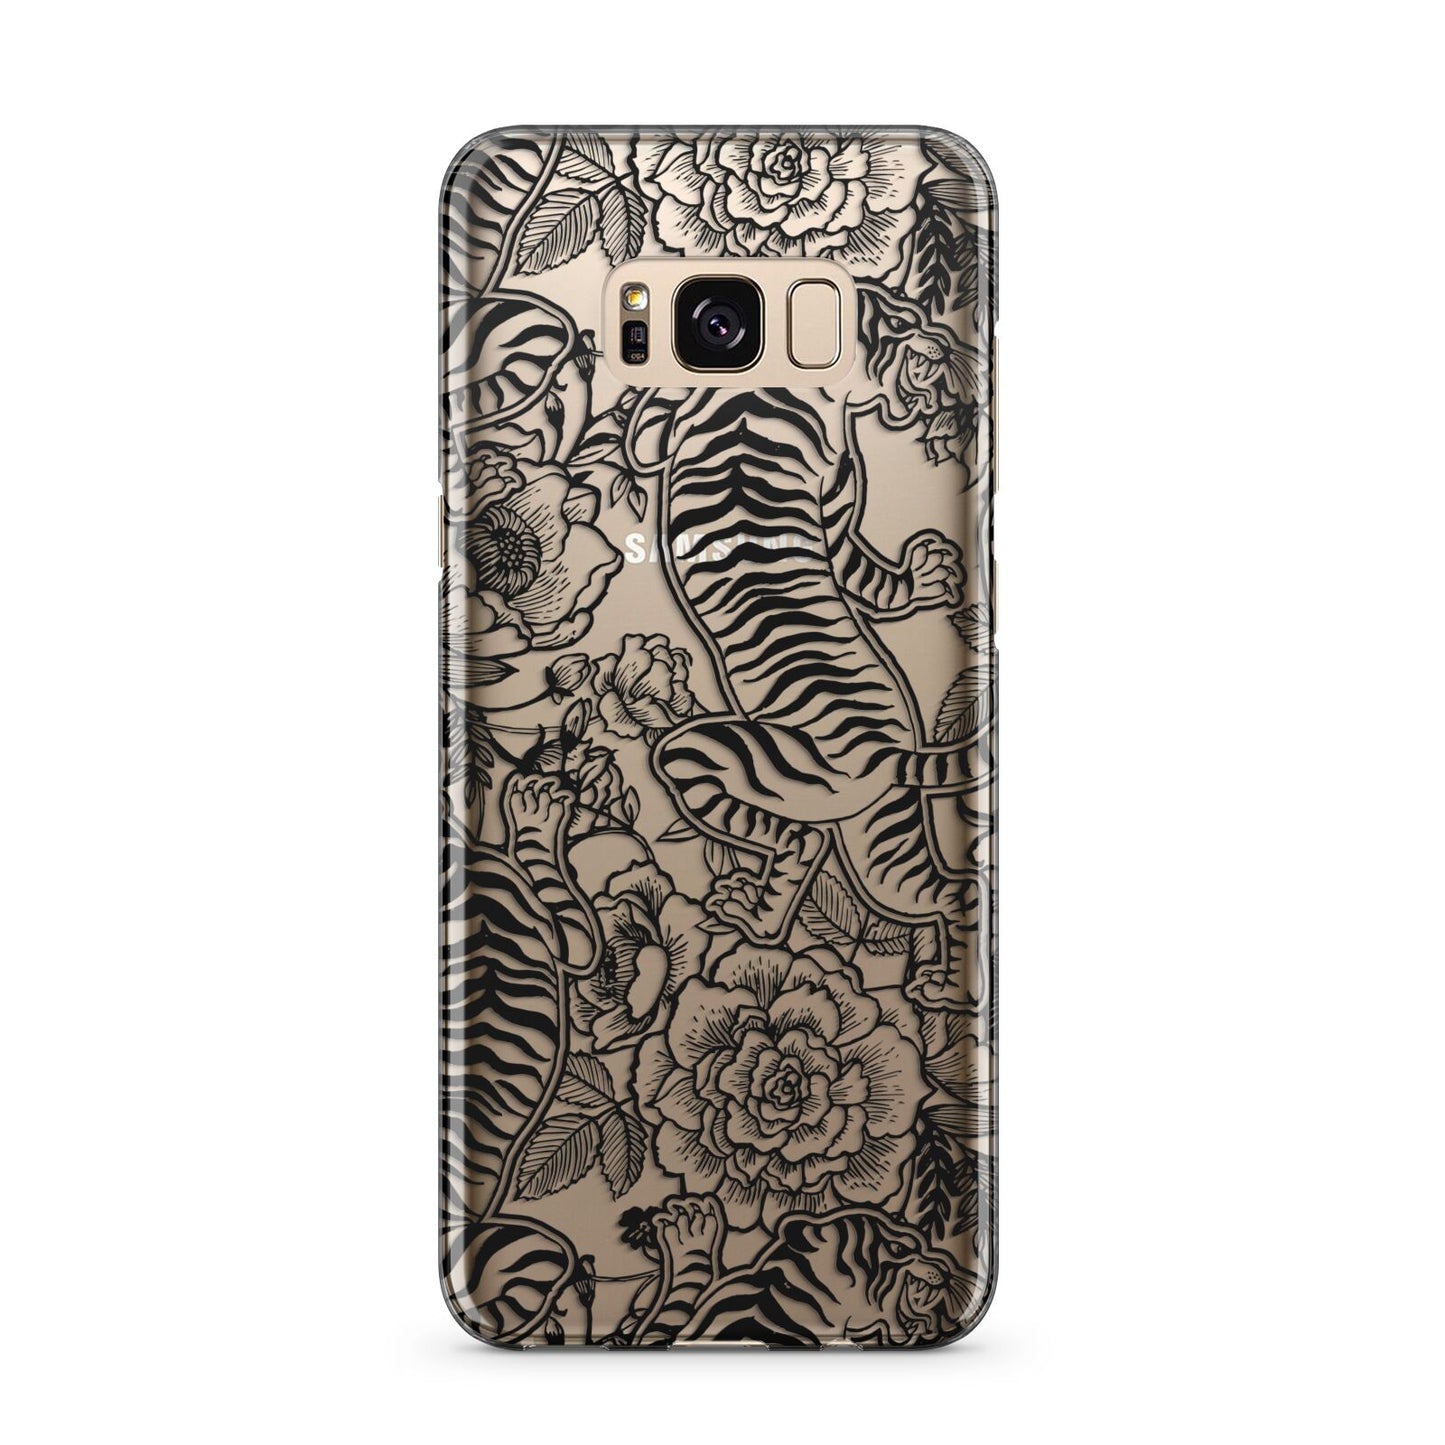 Chinese Tiger Samsung Galaxy S8 Plus Case